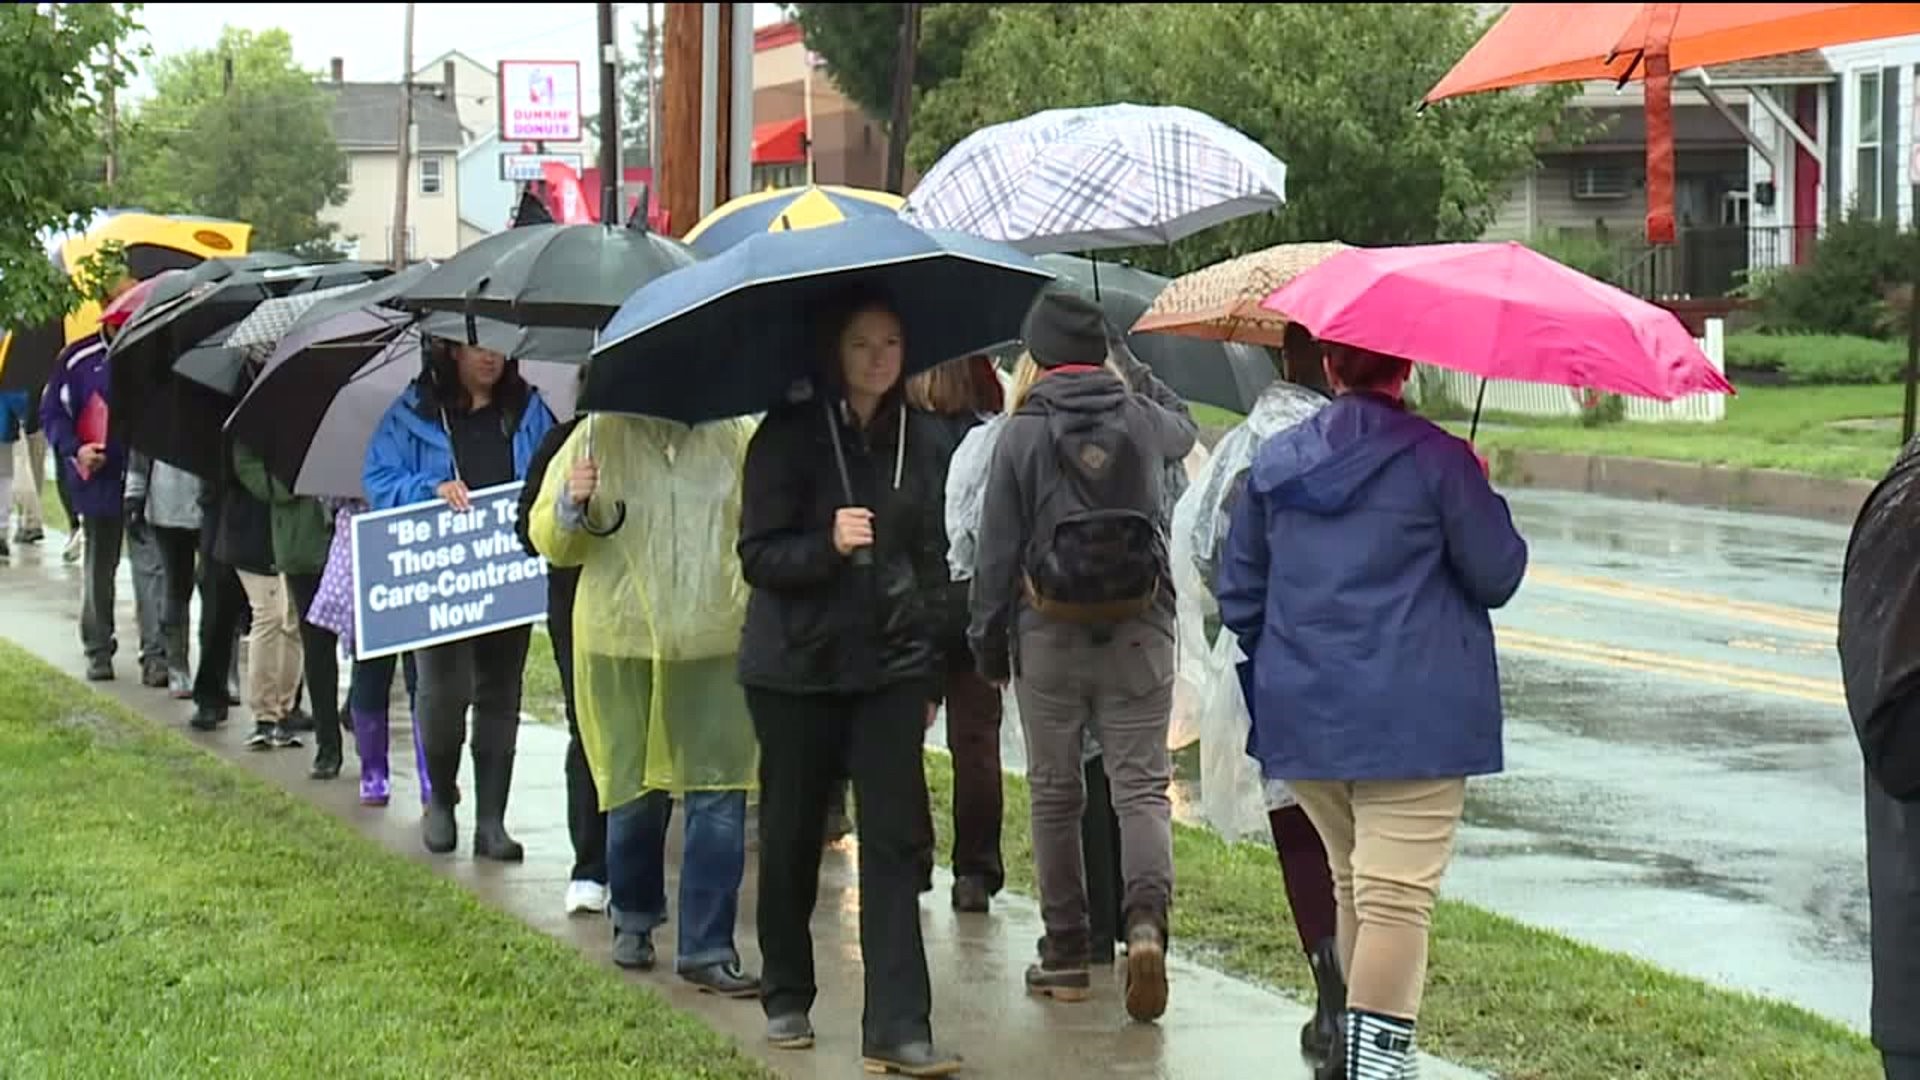 No Deal Reached, Strike Continues in East Stroudsburg School District